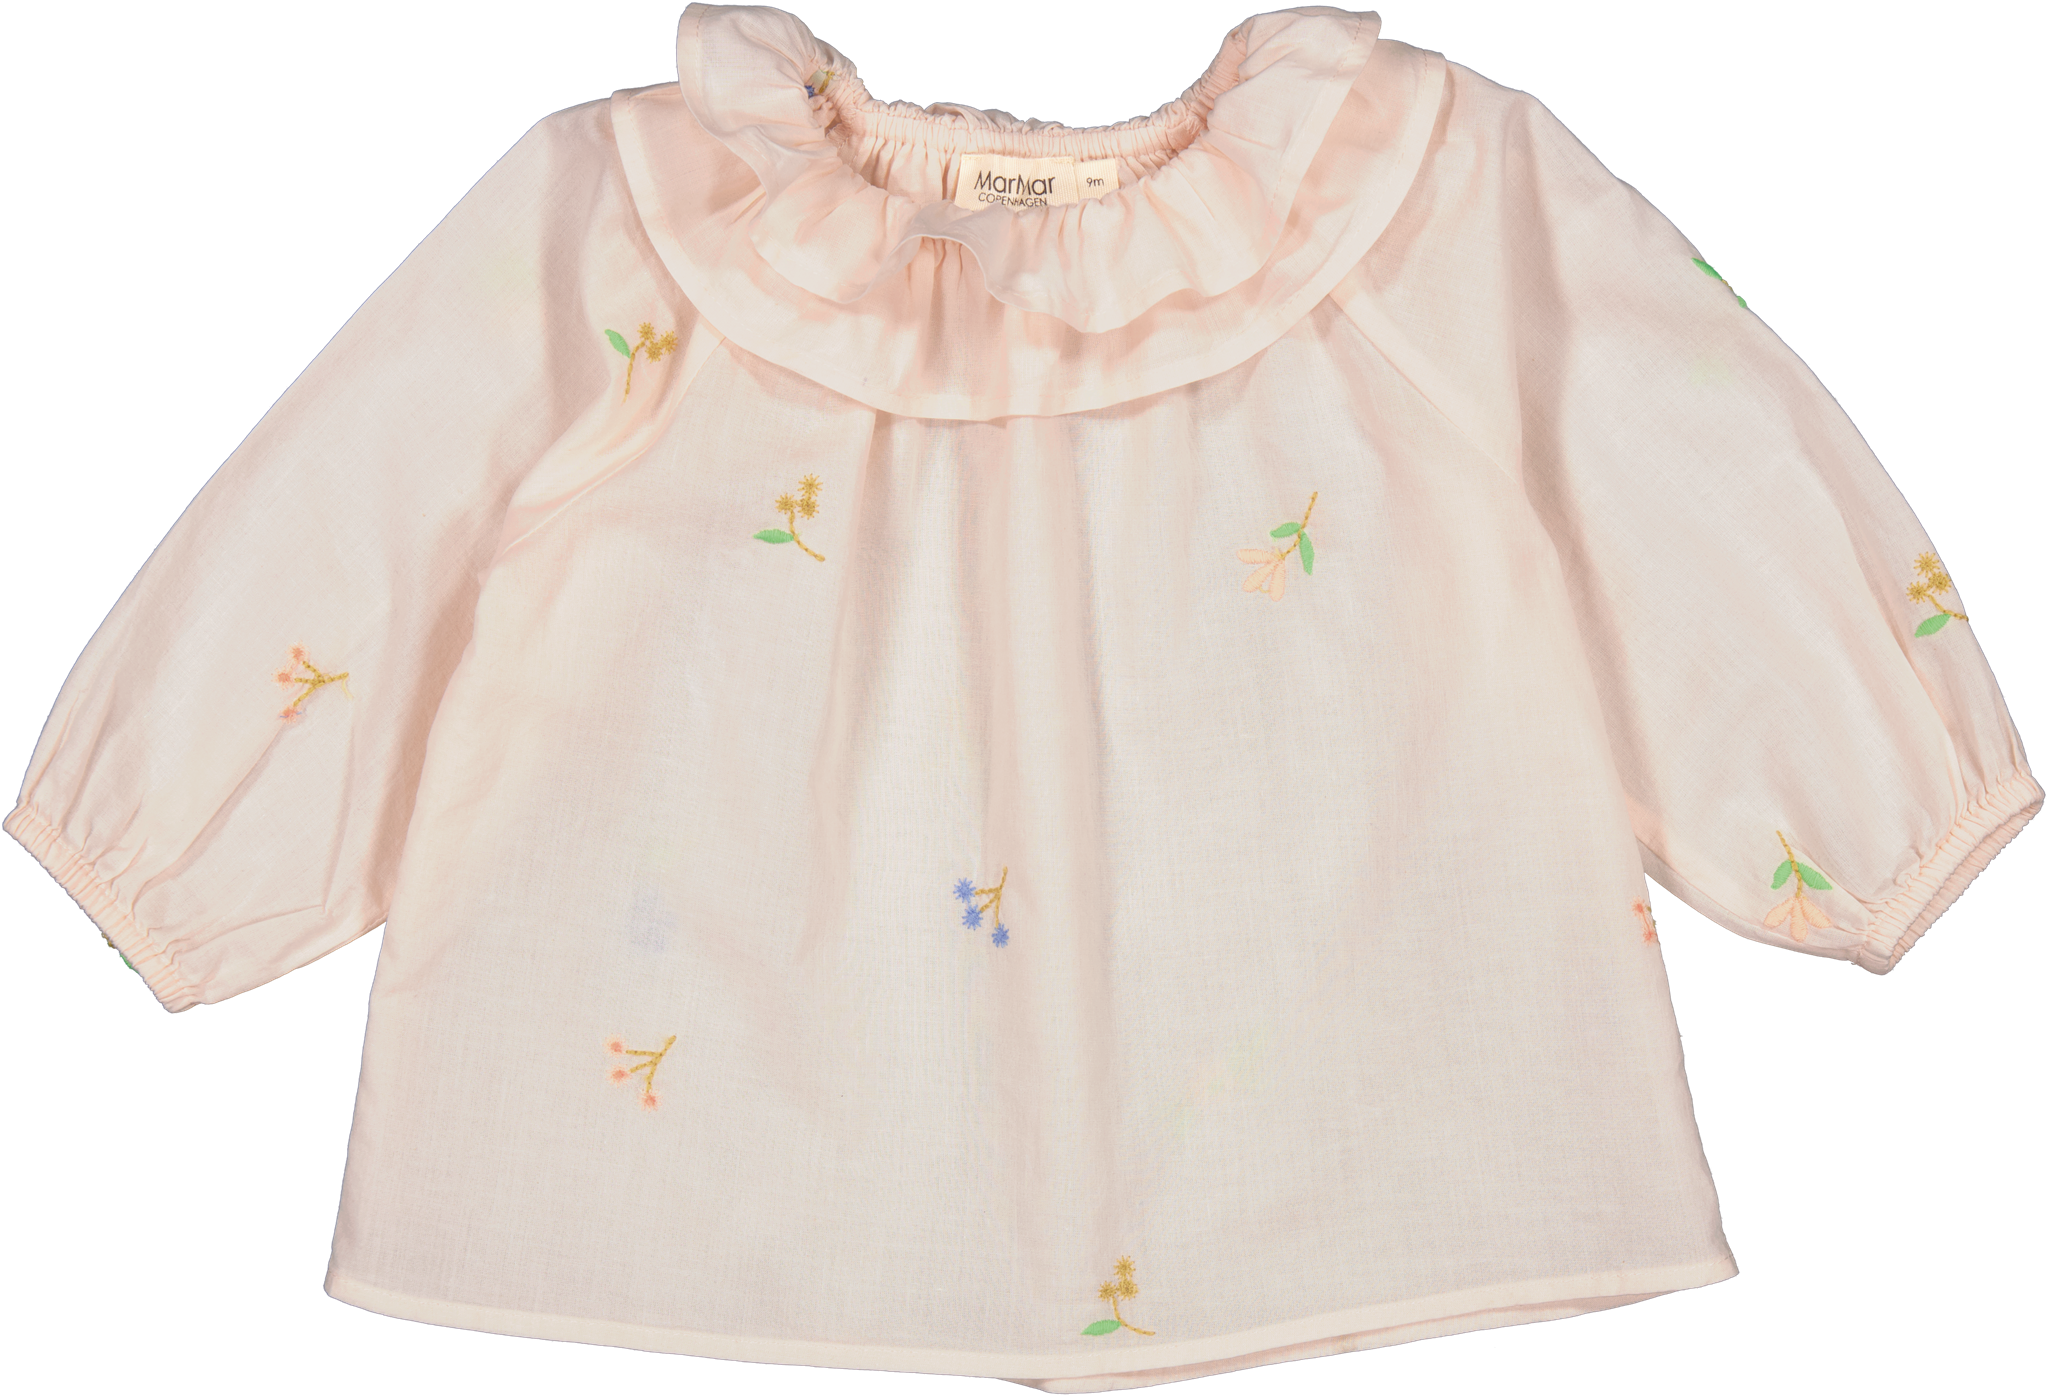 MarMar Cotton Embroidery Spring Embroidery Tonella Shirt